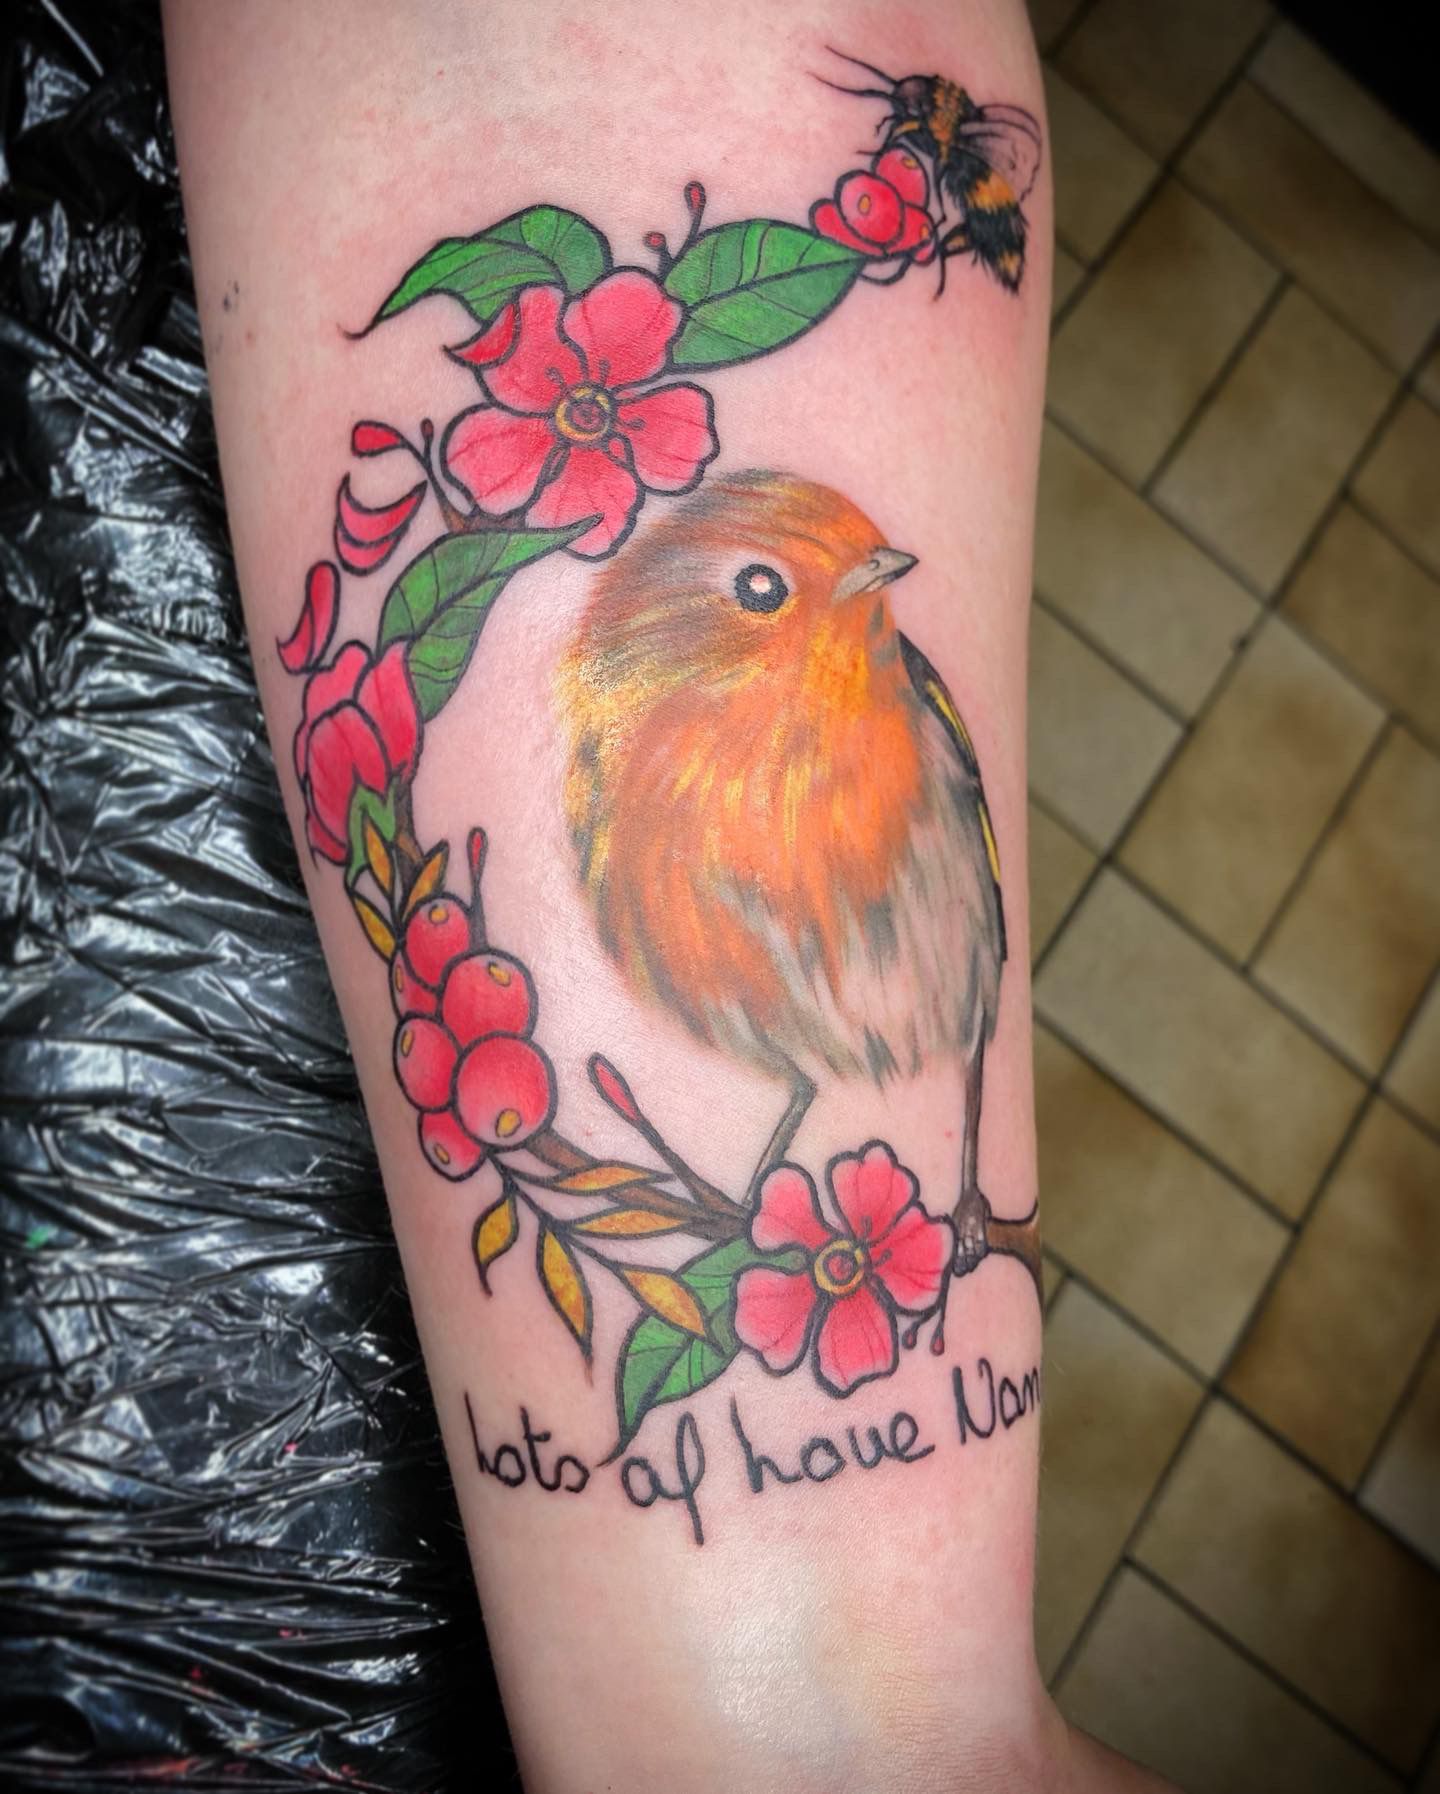 A touching memorial tattoo of, whom I assume to be, the late Queen. :  r/CasualUK